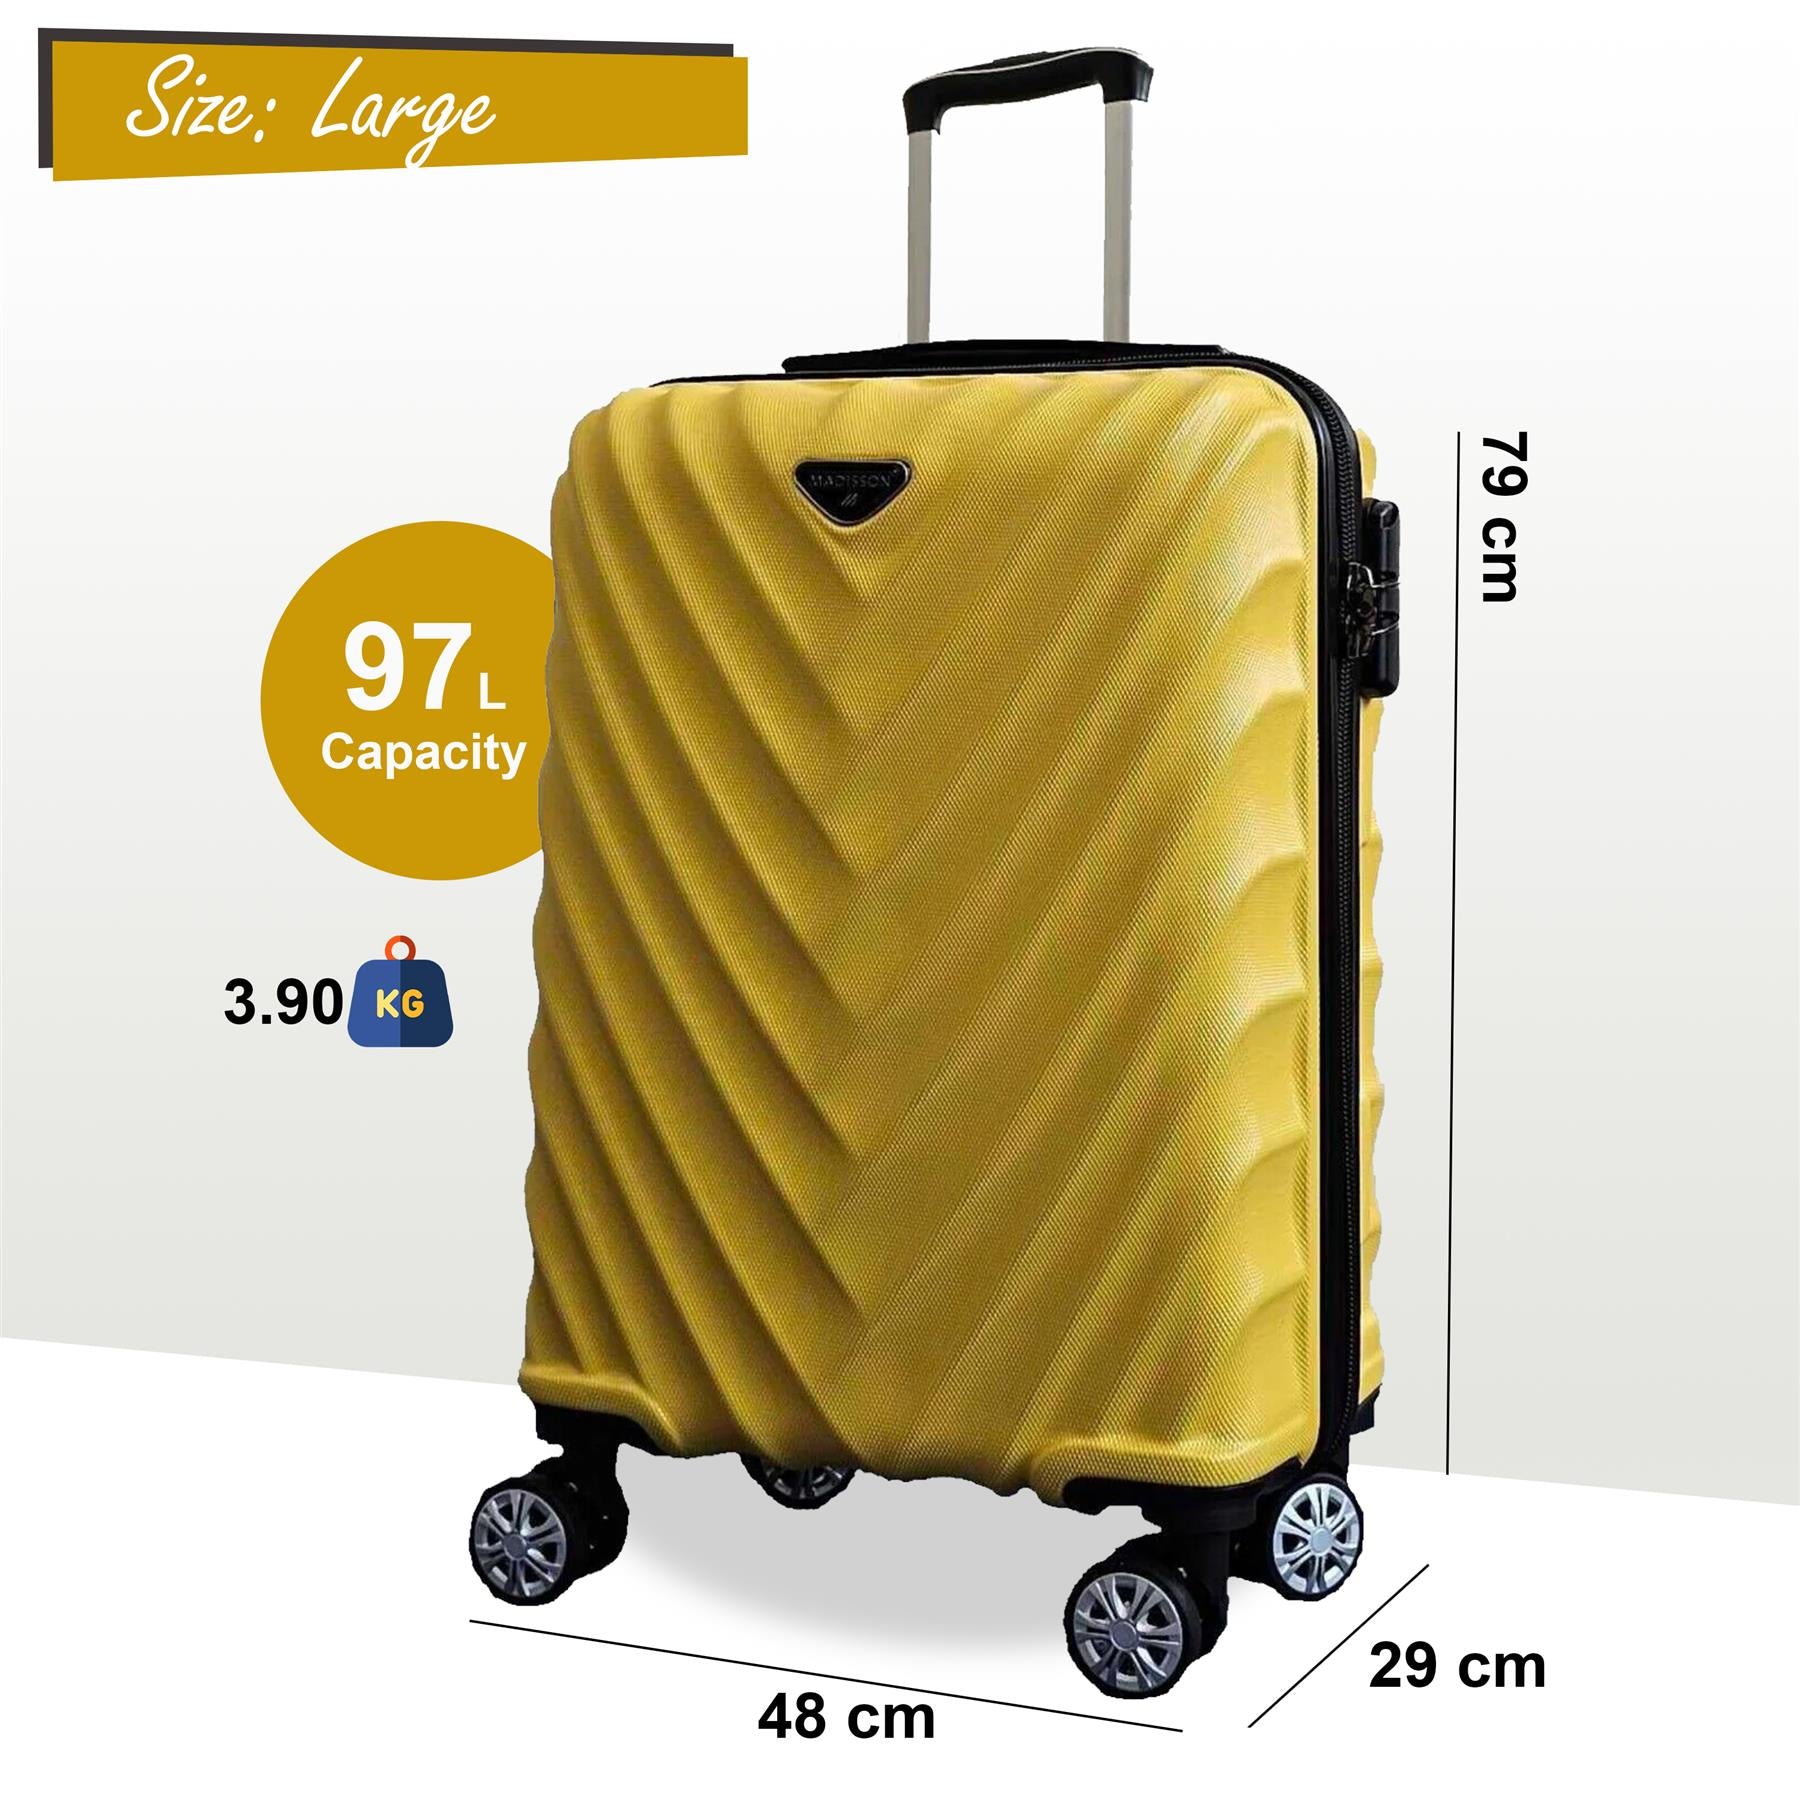 Chatom Large Hard Shell Suitcase in Yellow